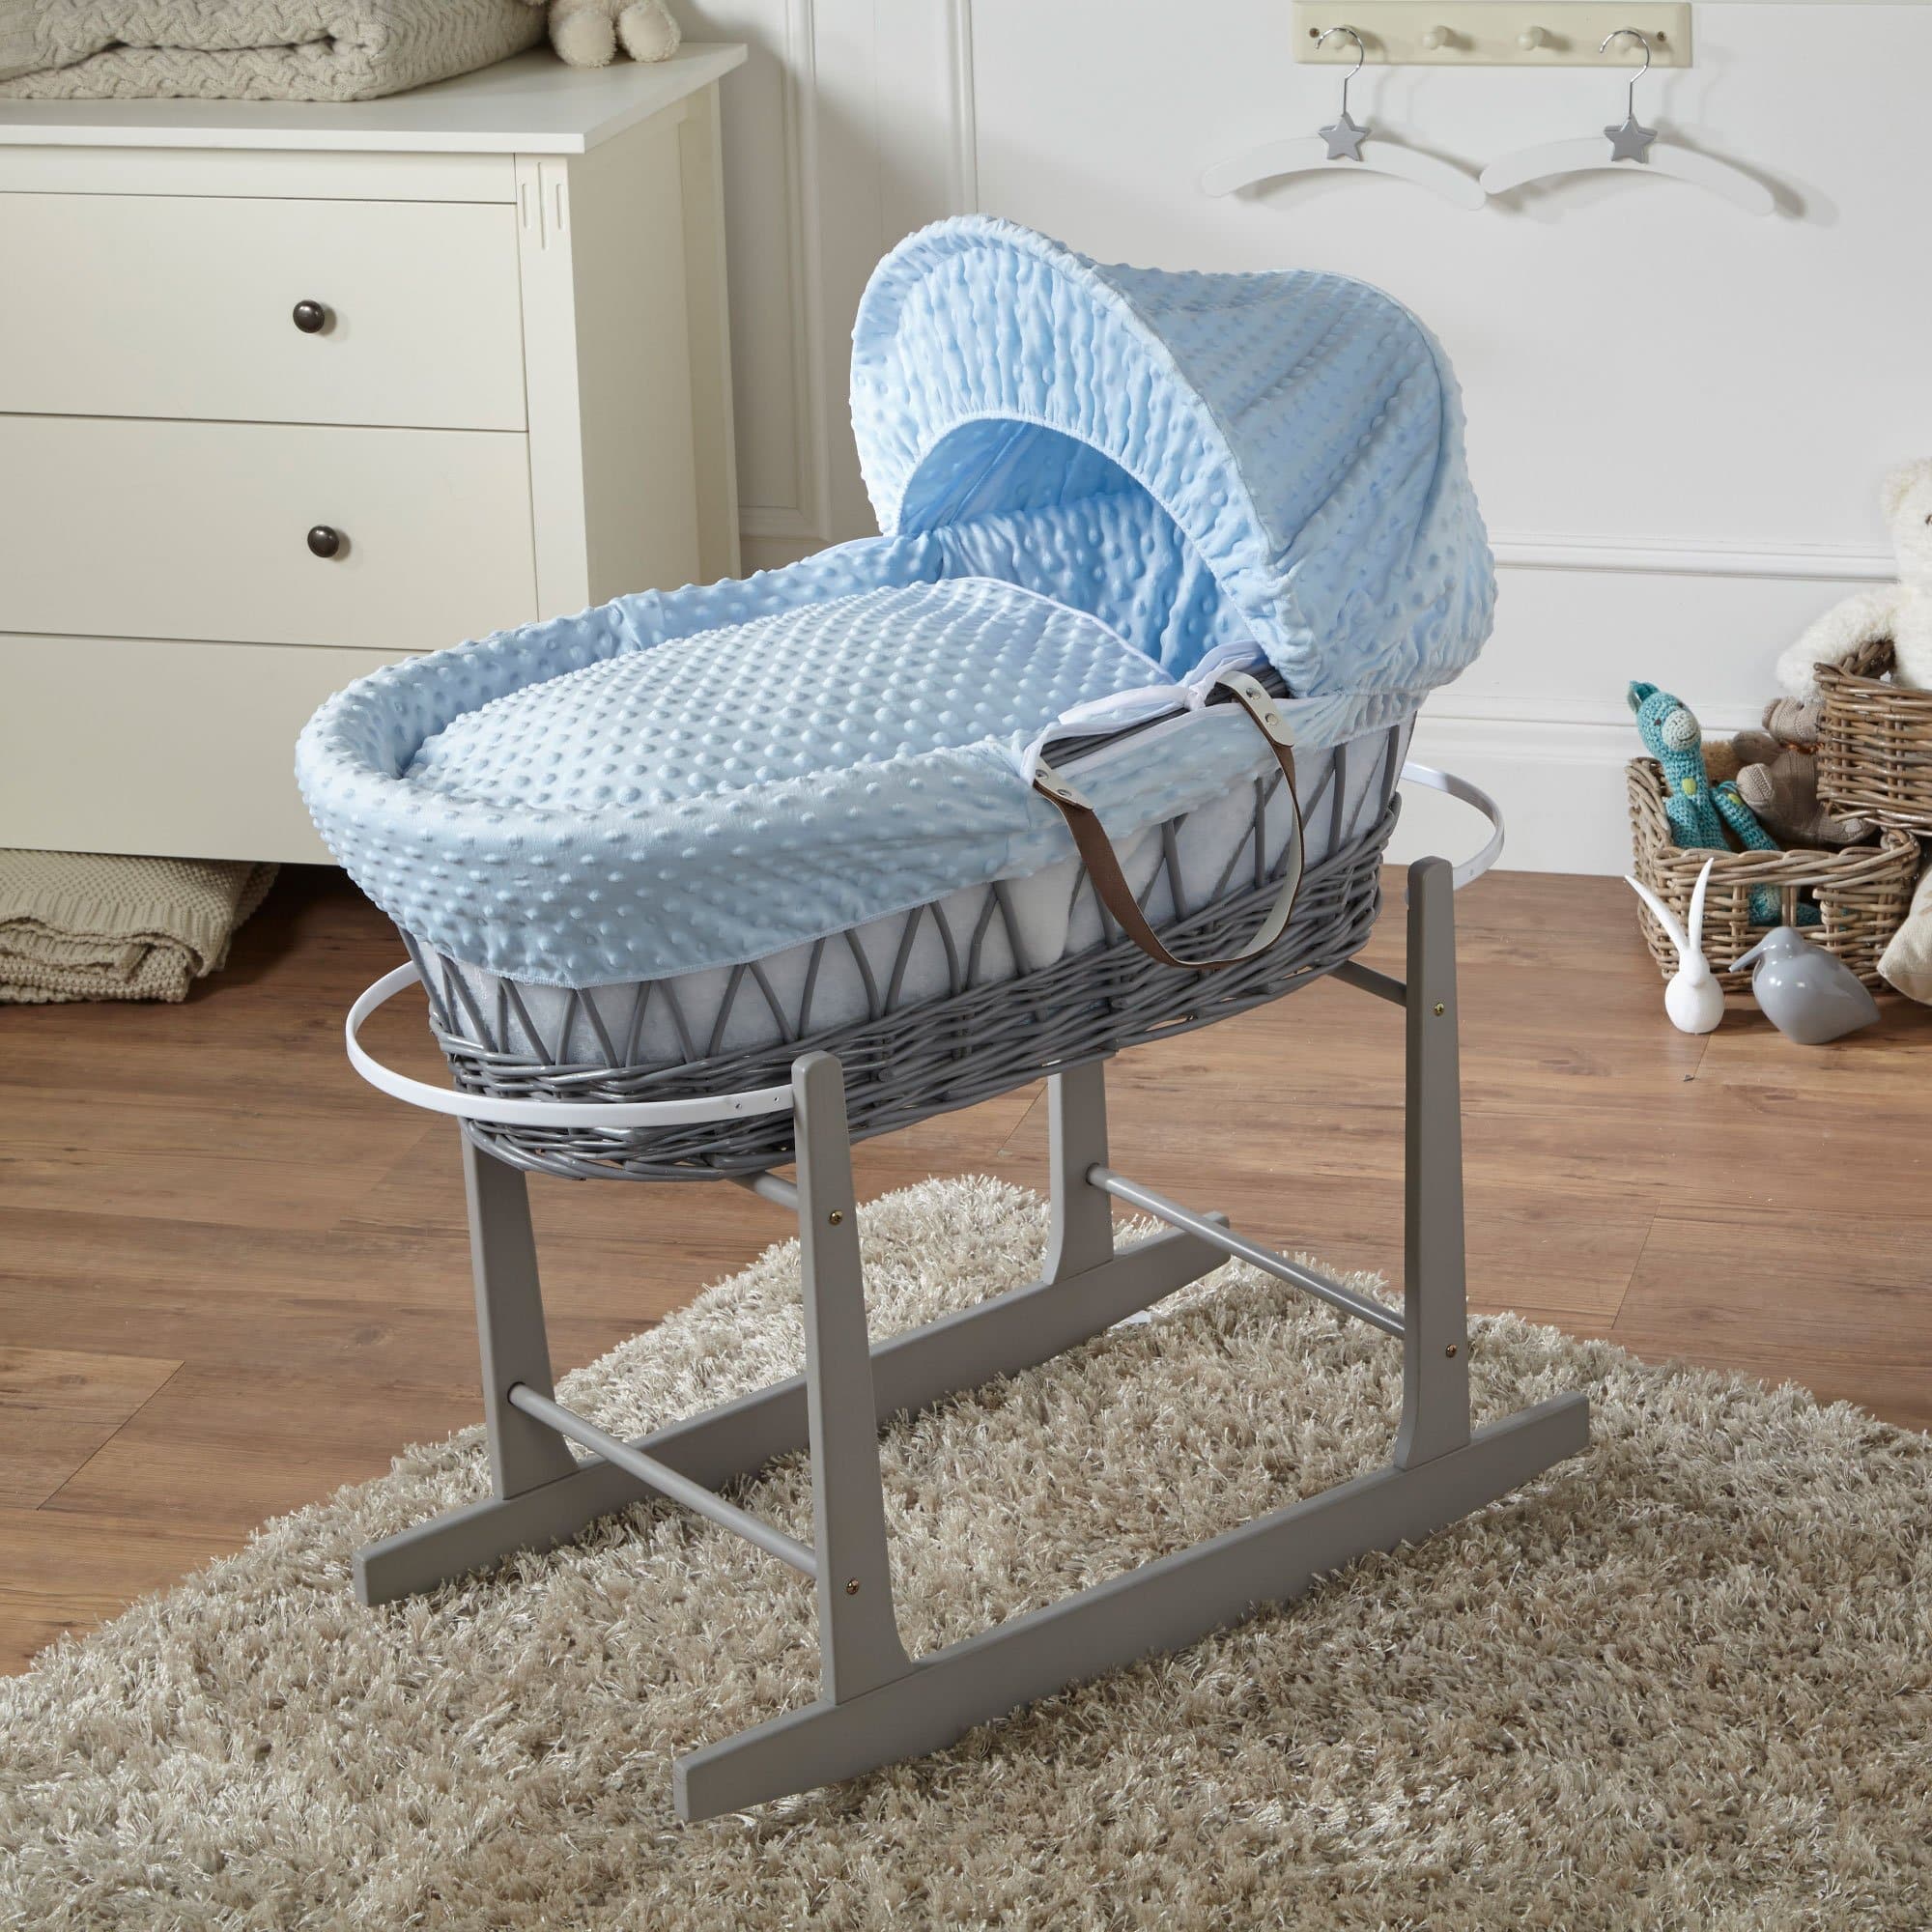 Wicker Baby Moses Basket With Stand - Grey / Dimple / Blue | For Your Little One